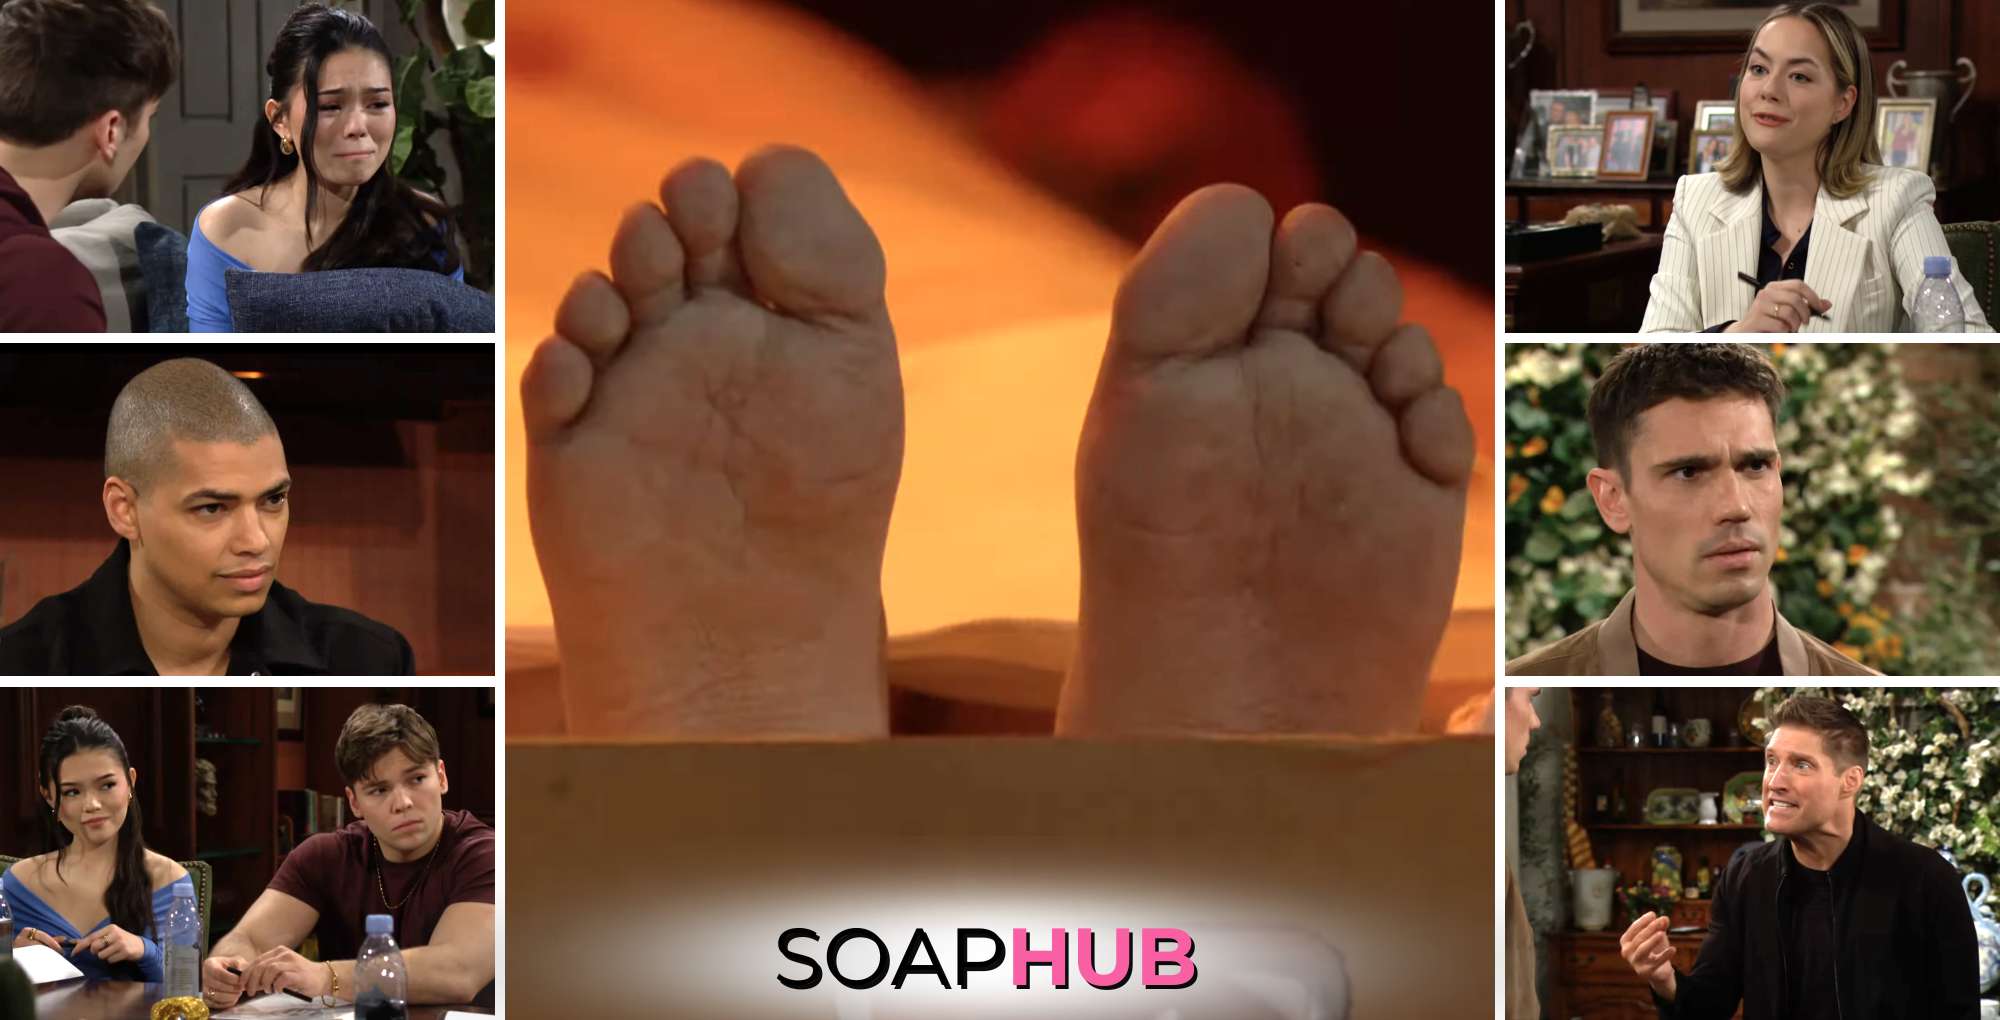 The Bold and the Beautiful spoilers weekly video preview features RJ, Luna, Zende, Hope, Finn, and Deacon with the Soap Hub logo across the bottom.